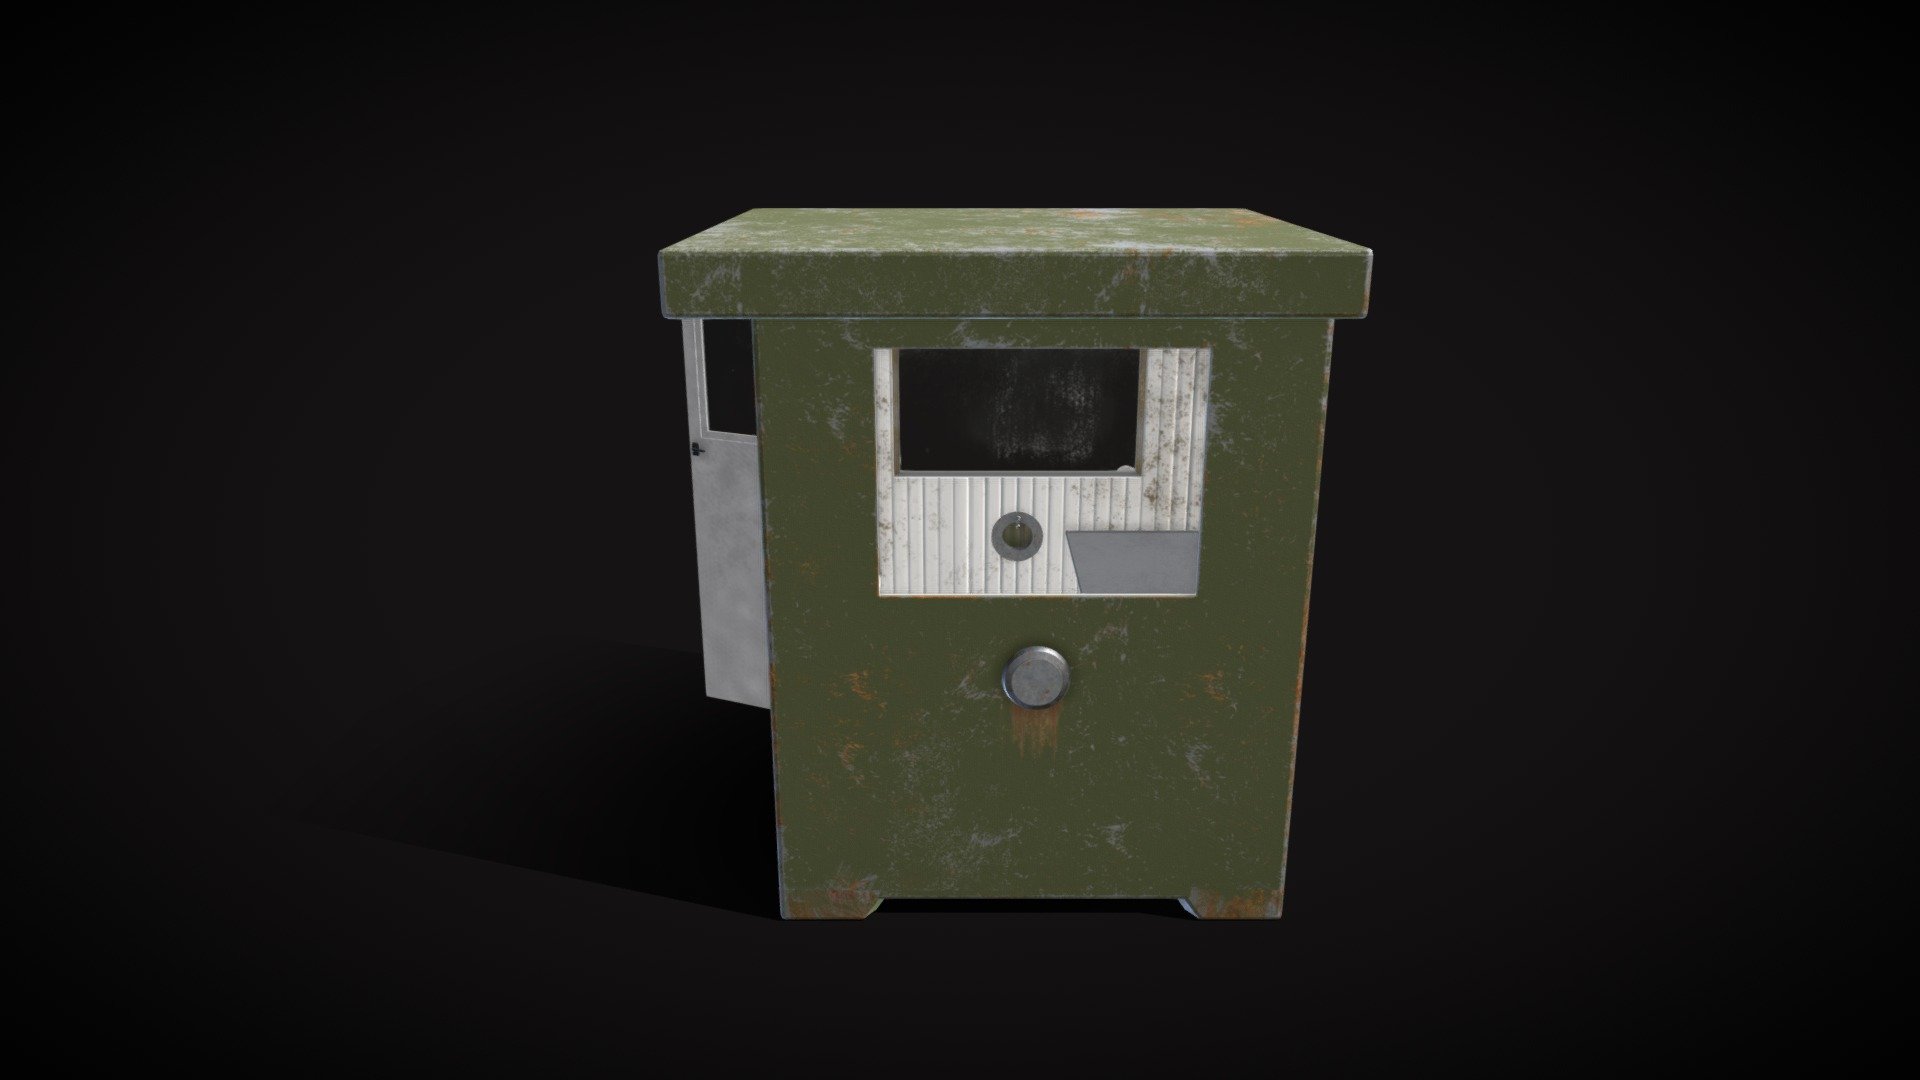 A small military gatehouse, used for checkpoint or park control.

Used in unreal engine &ldquo;small military camp pack